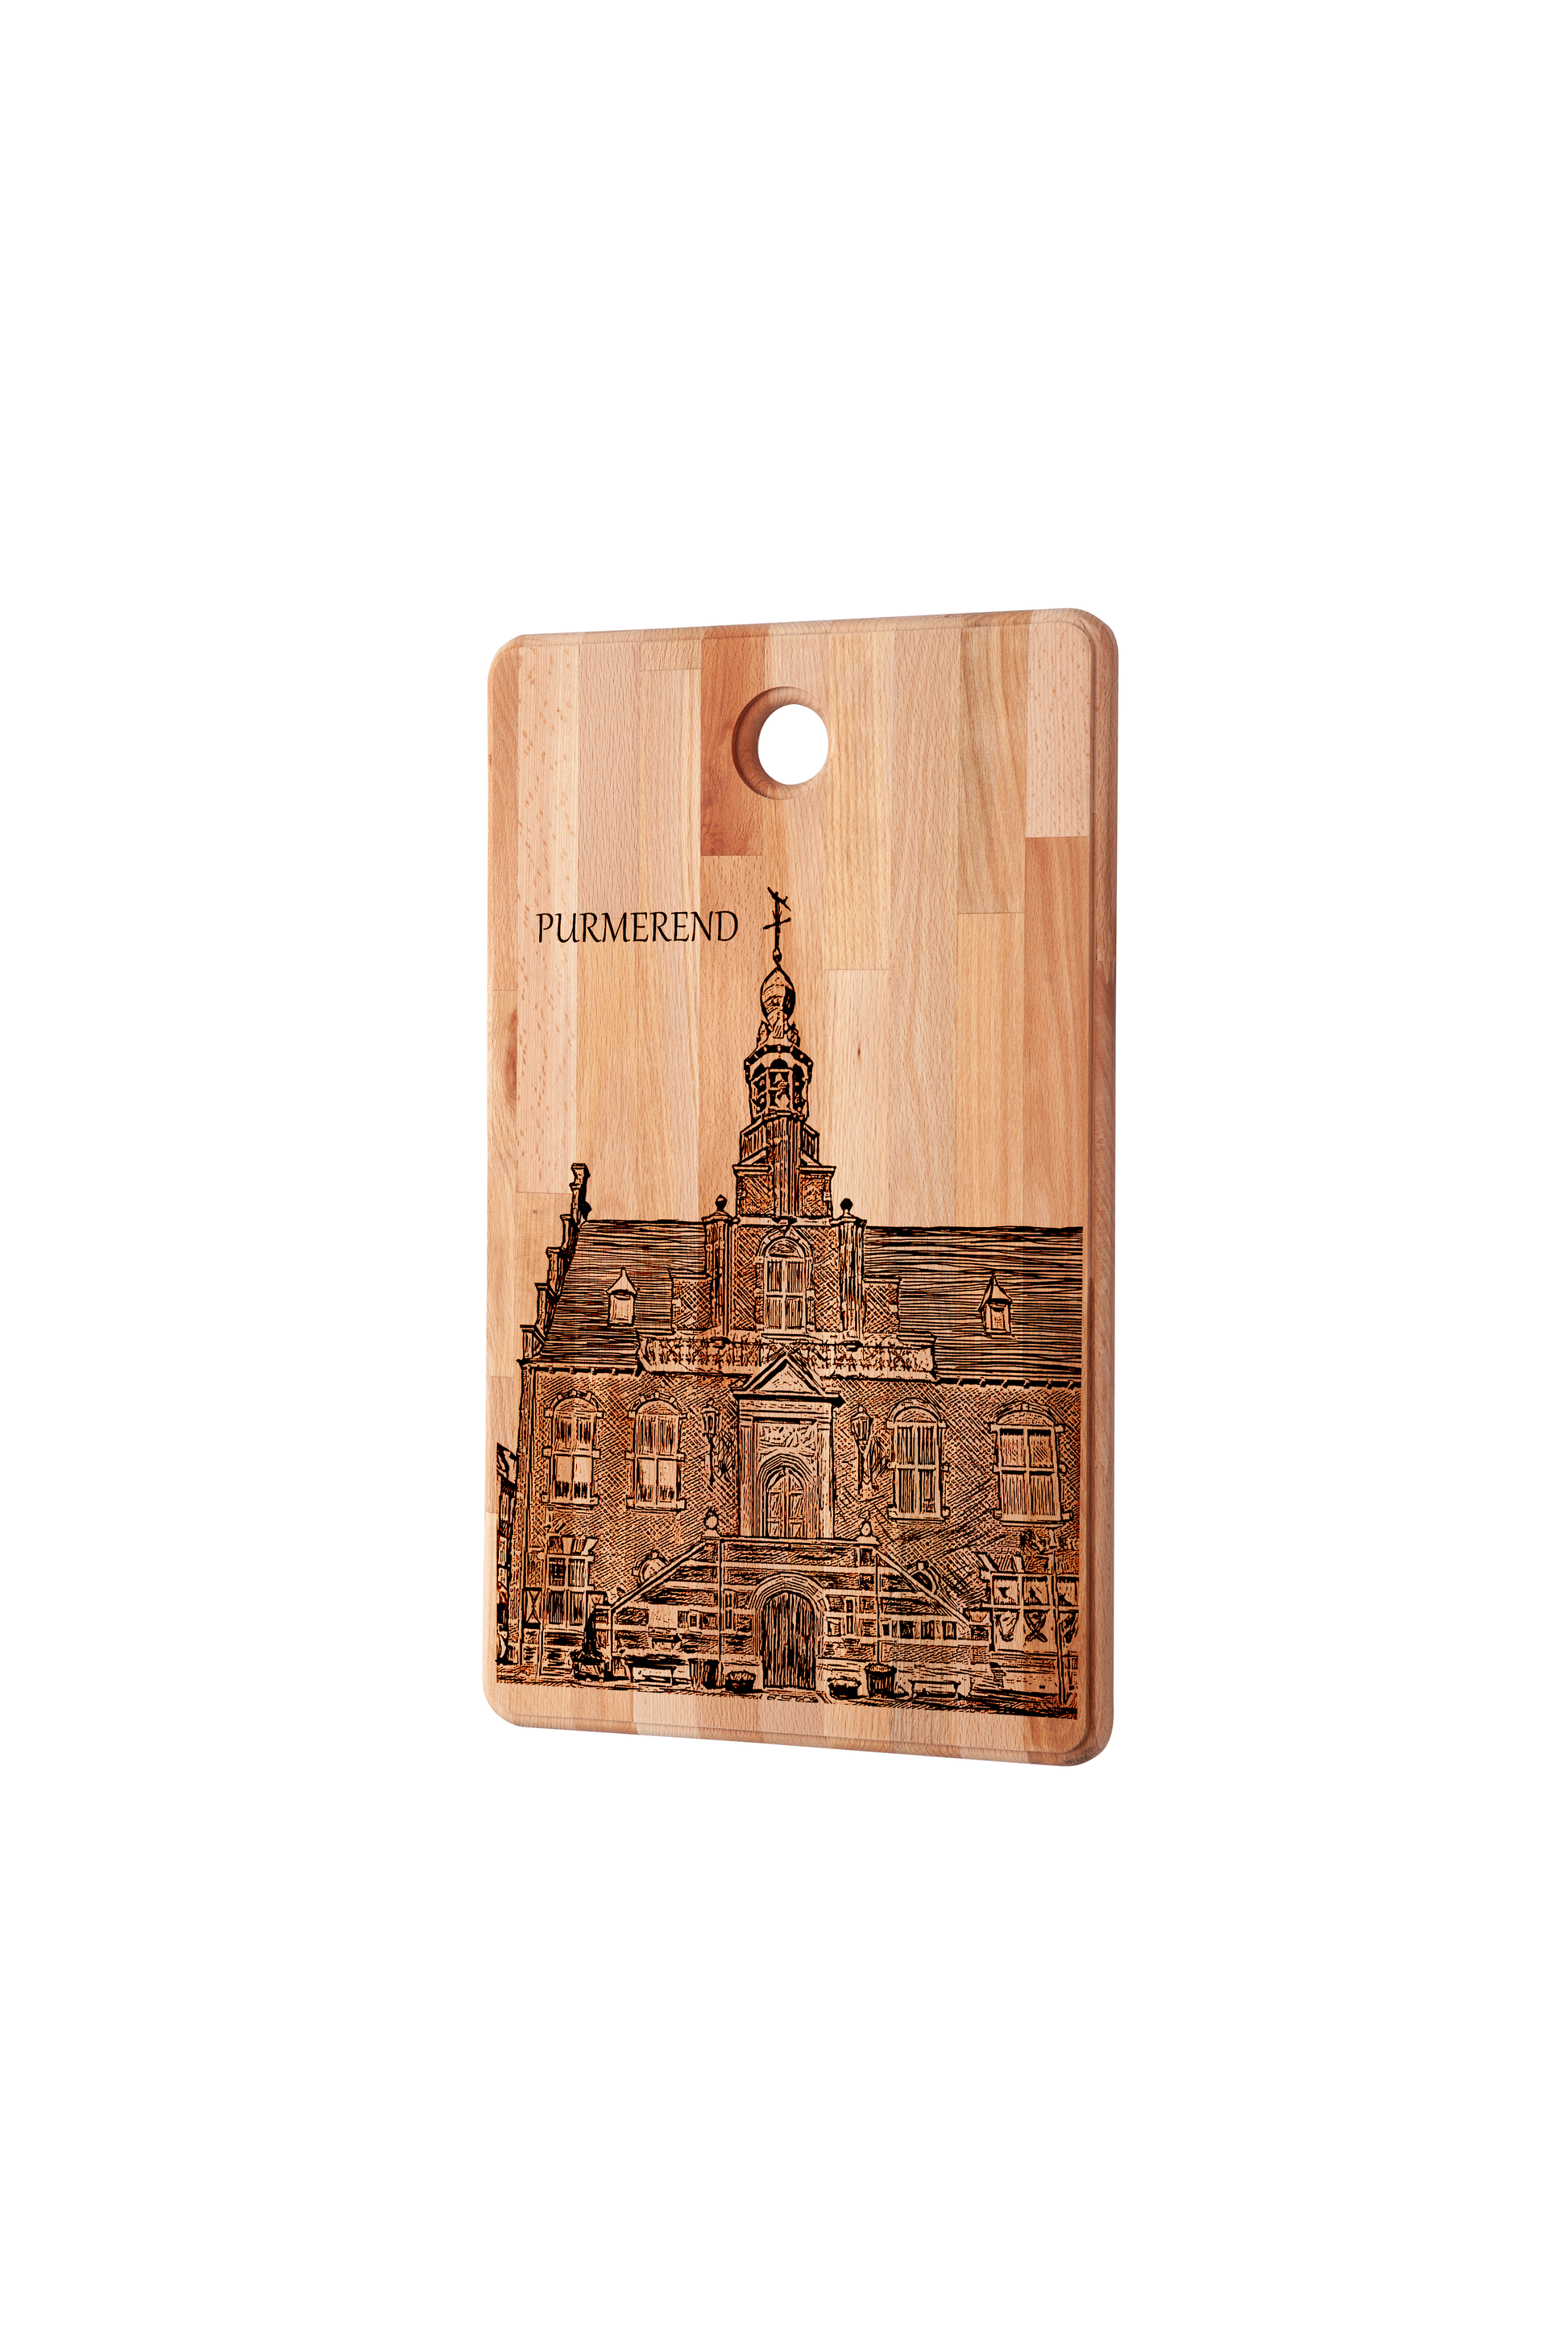 Purmerend, Stadhuis, cutting board, side view